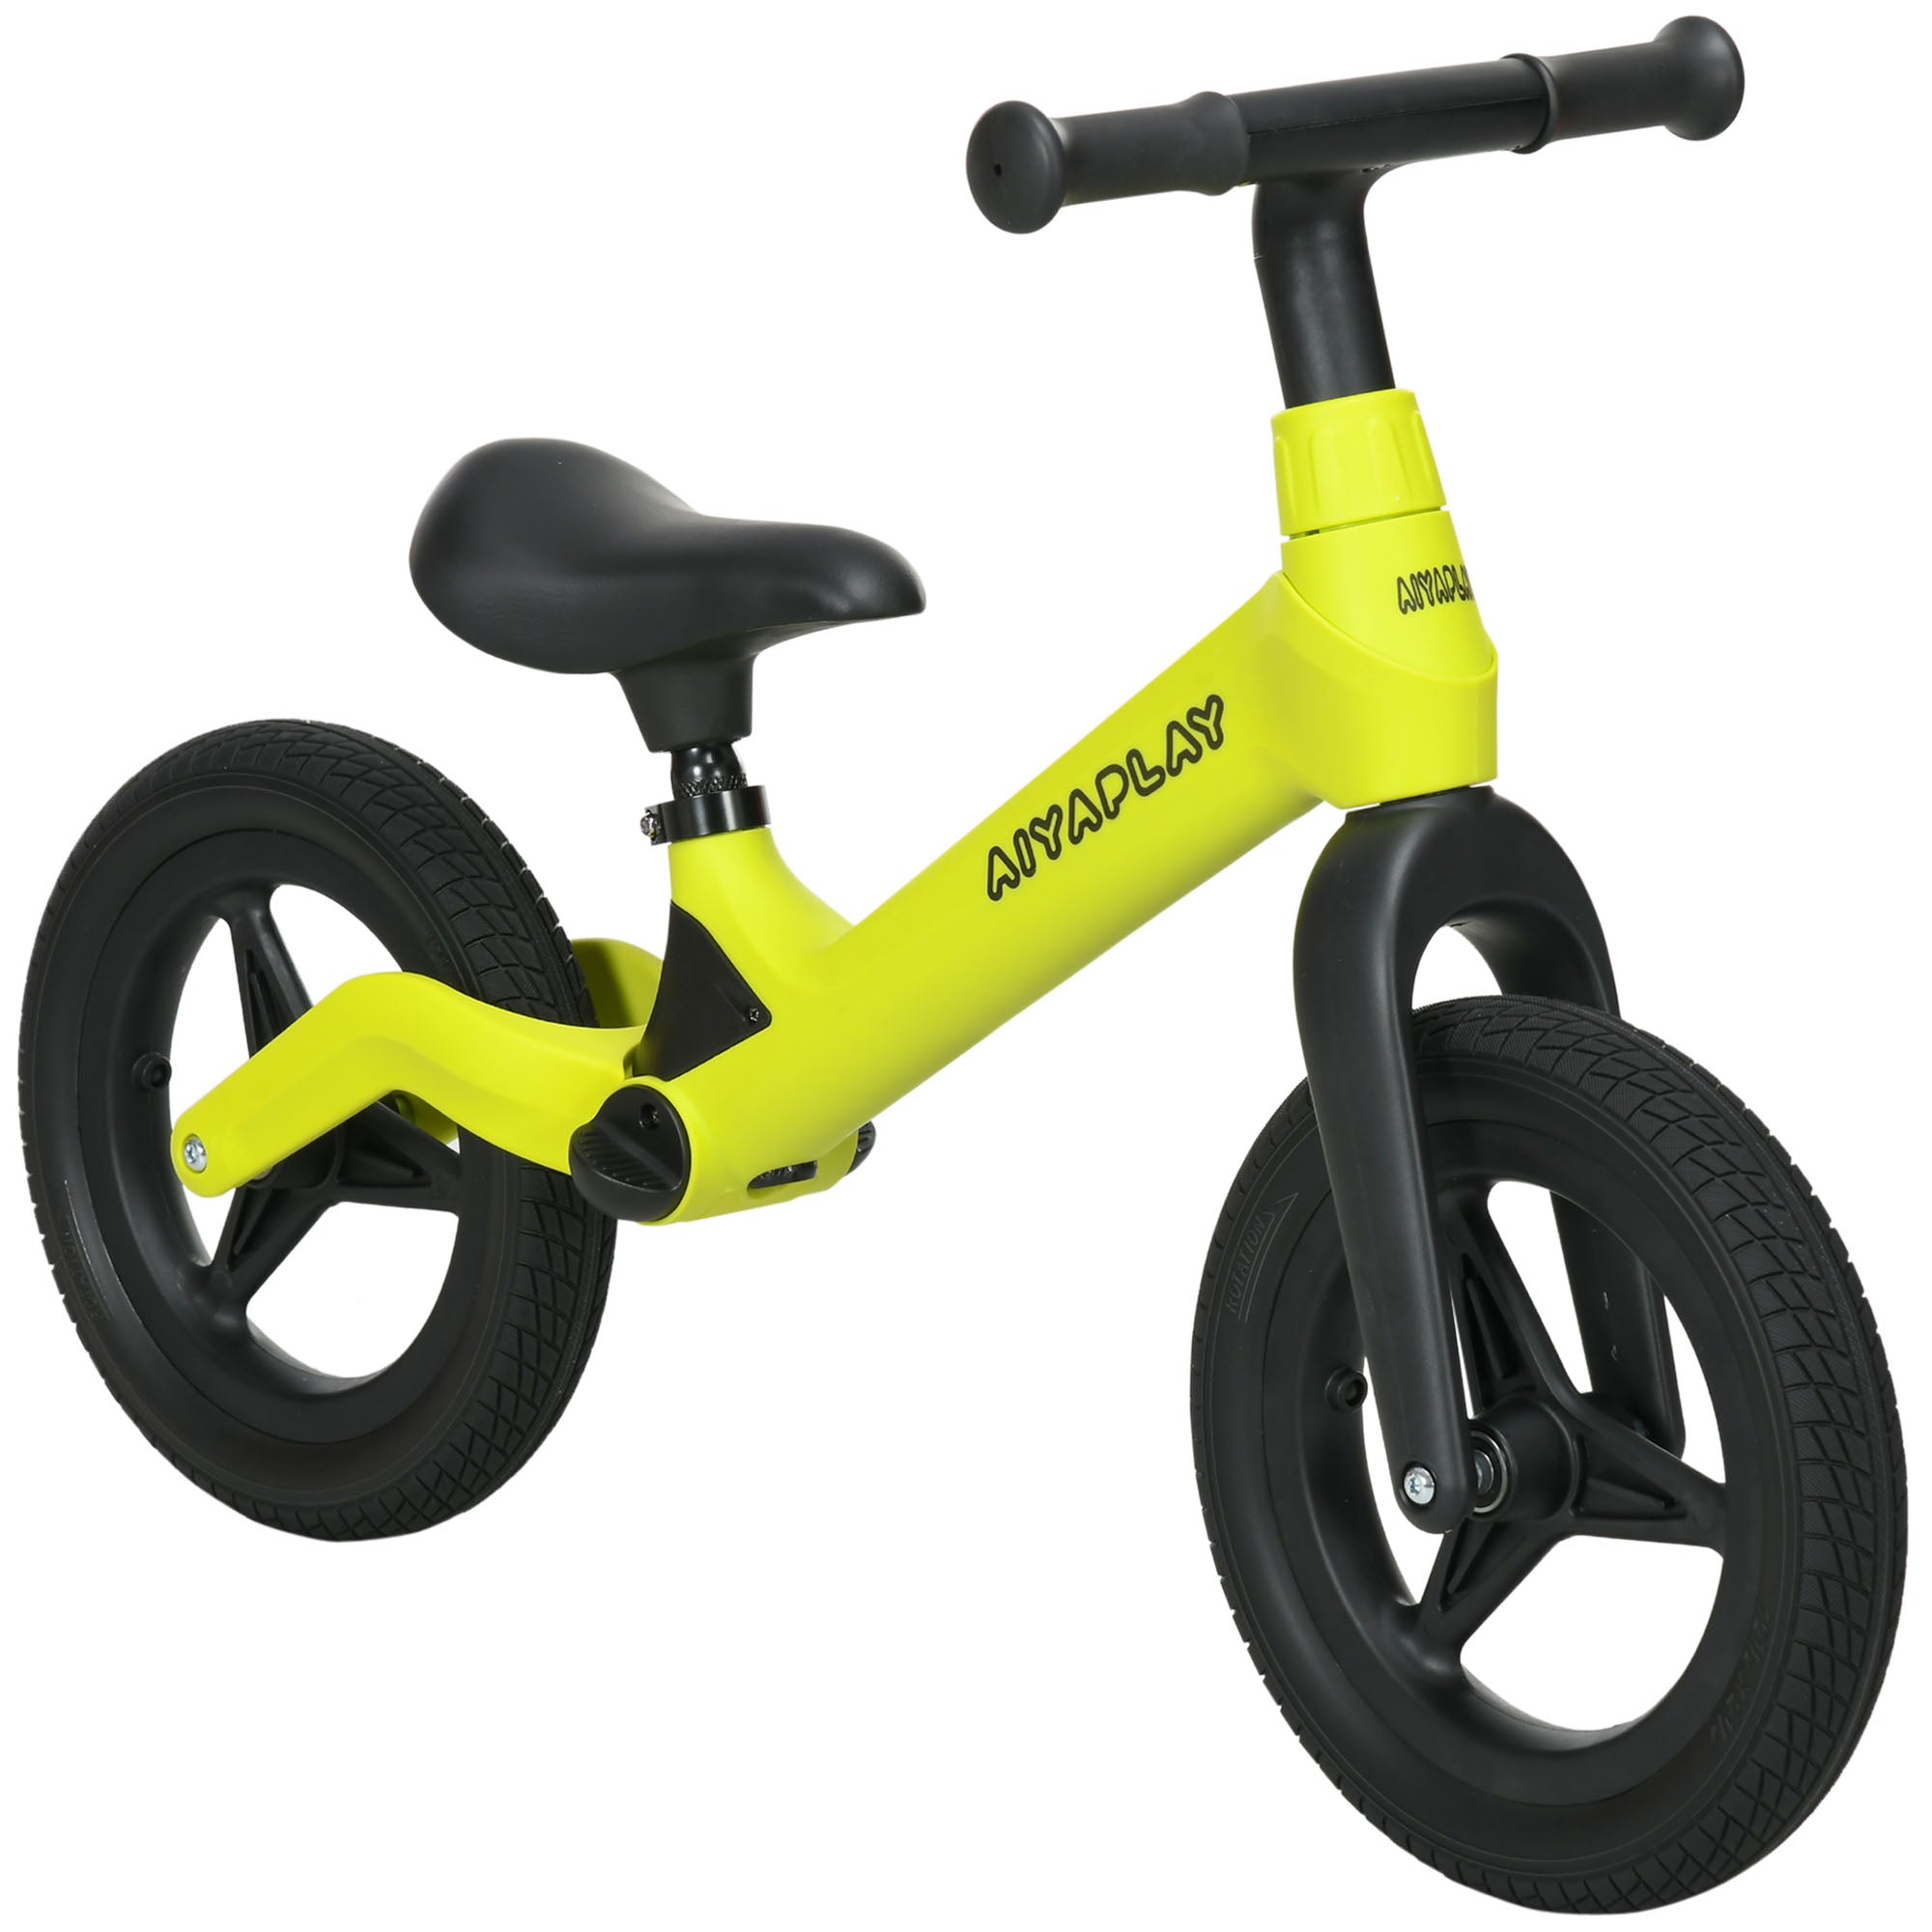 AIYAPLAY Balance Bike with Adjustable Seat and Handlebar, PU Wheels, No Pedal, Aged 30-60 Months up to 25kg - Green